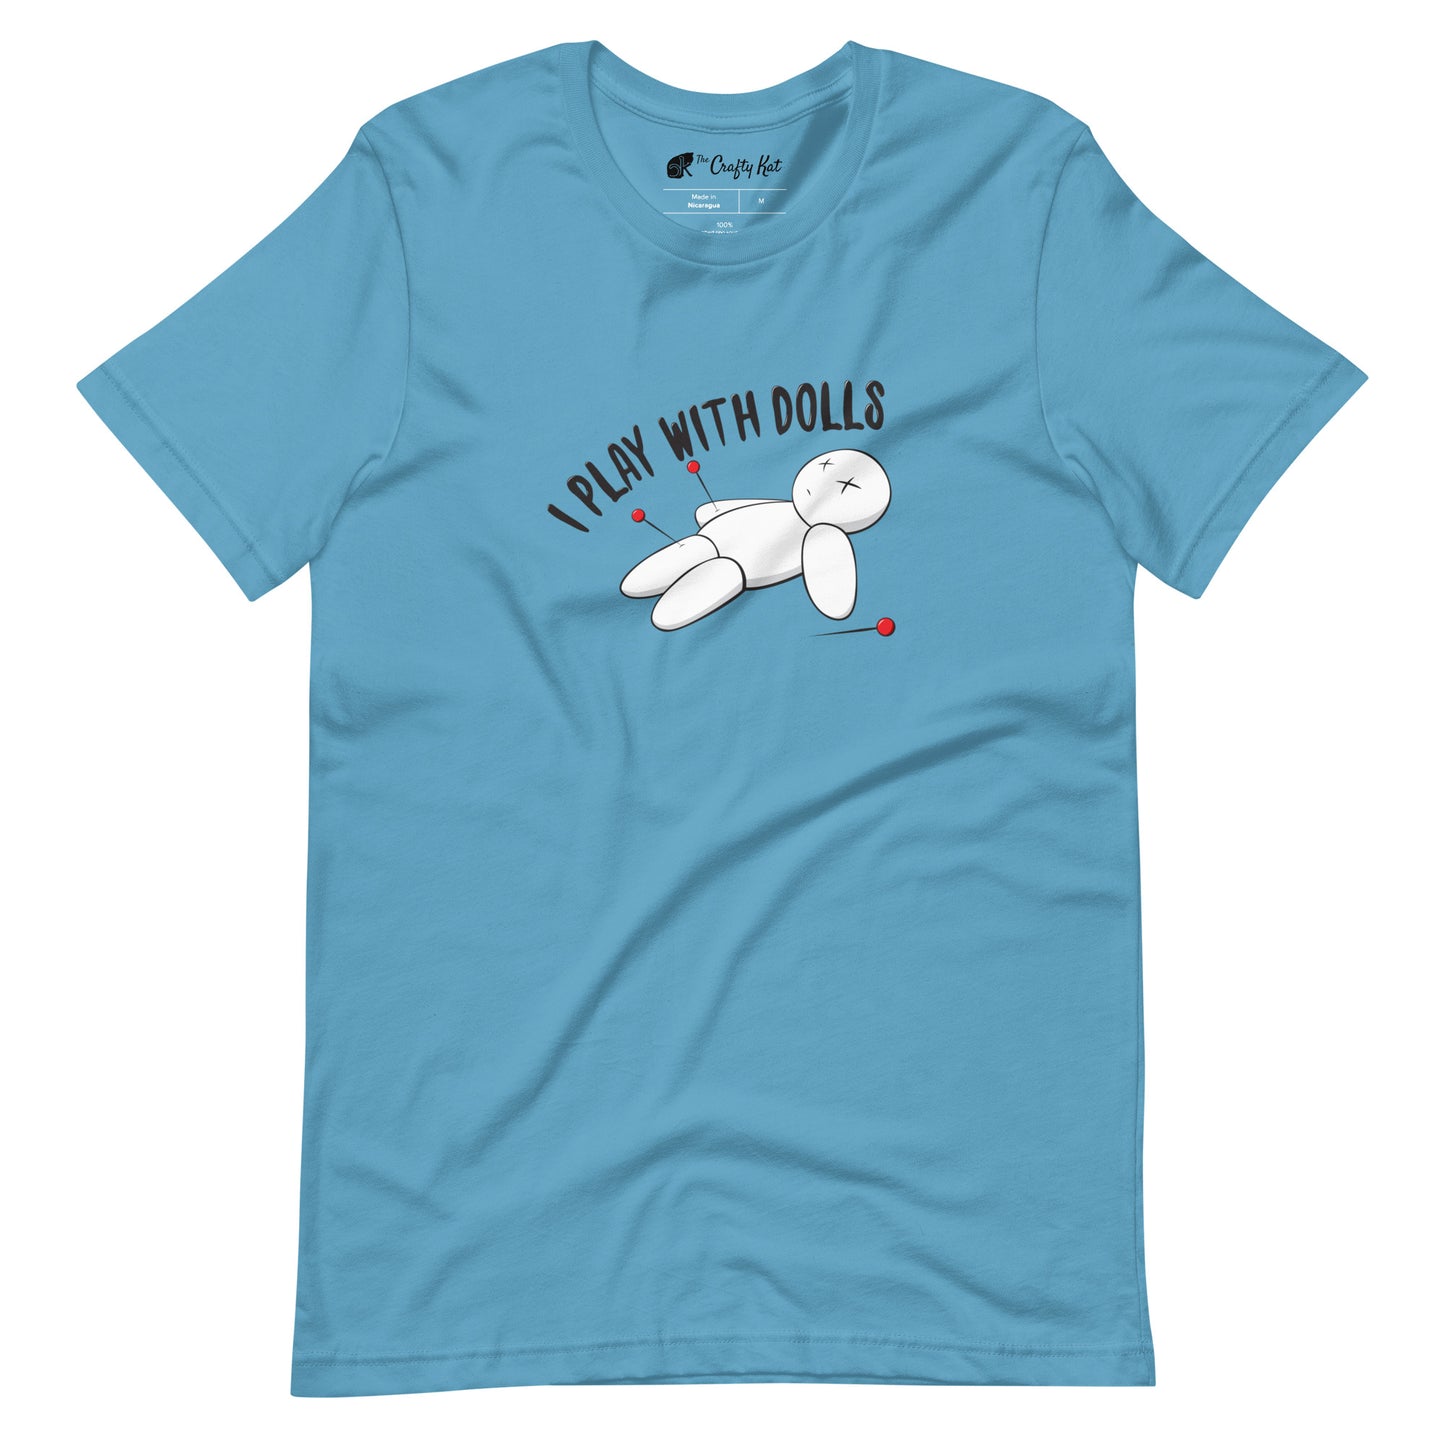 Ocean Blue t-shirt with graphic of white voodoo doll with Xs for eyes stuck with several pins and text "I PLAY WITH DOLLS"